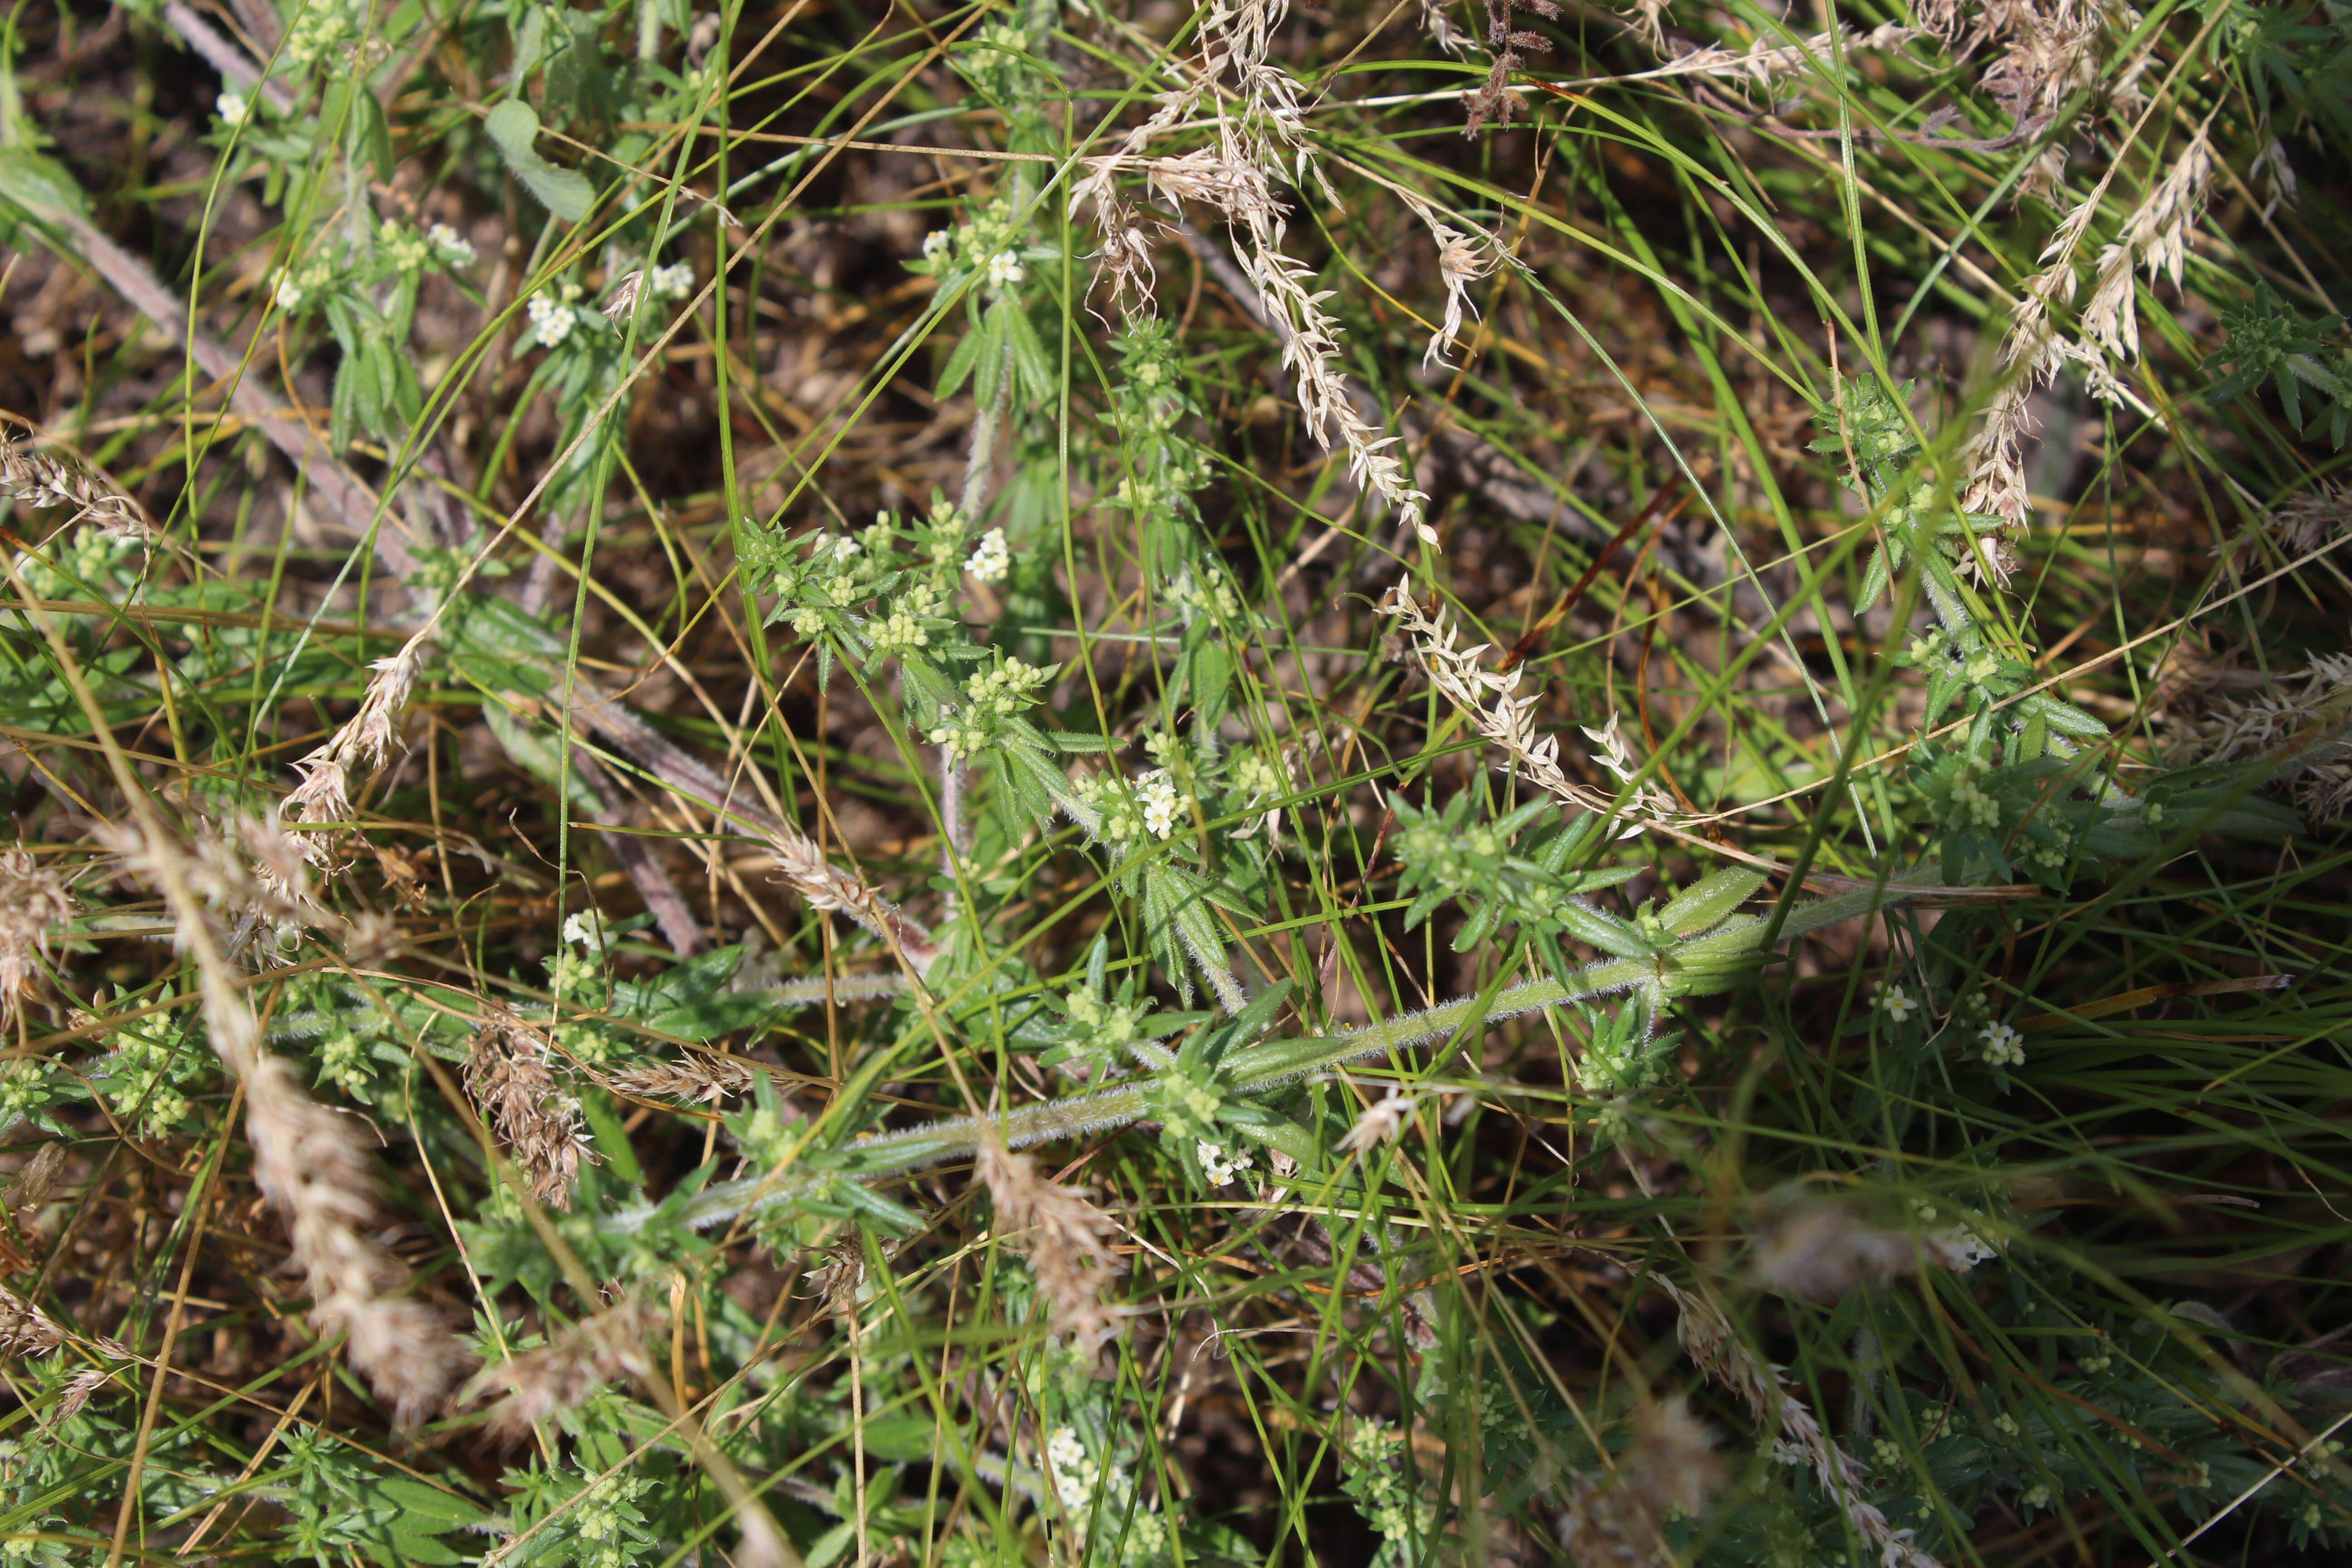 Image of spreading bedstraw